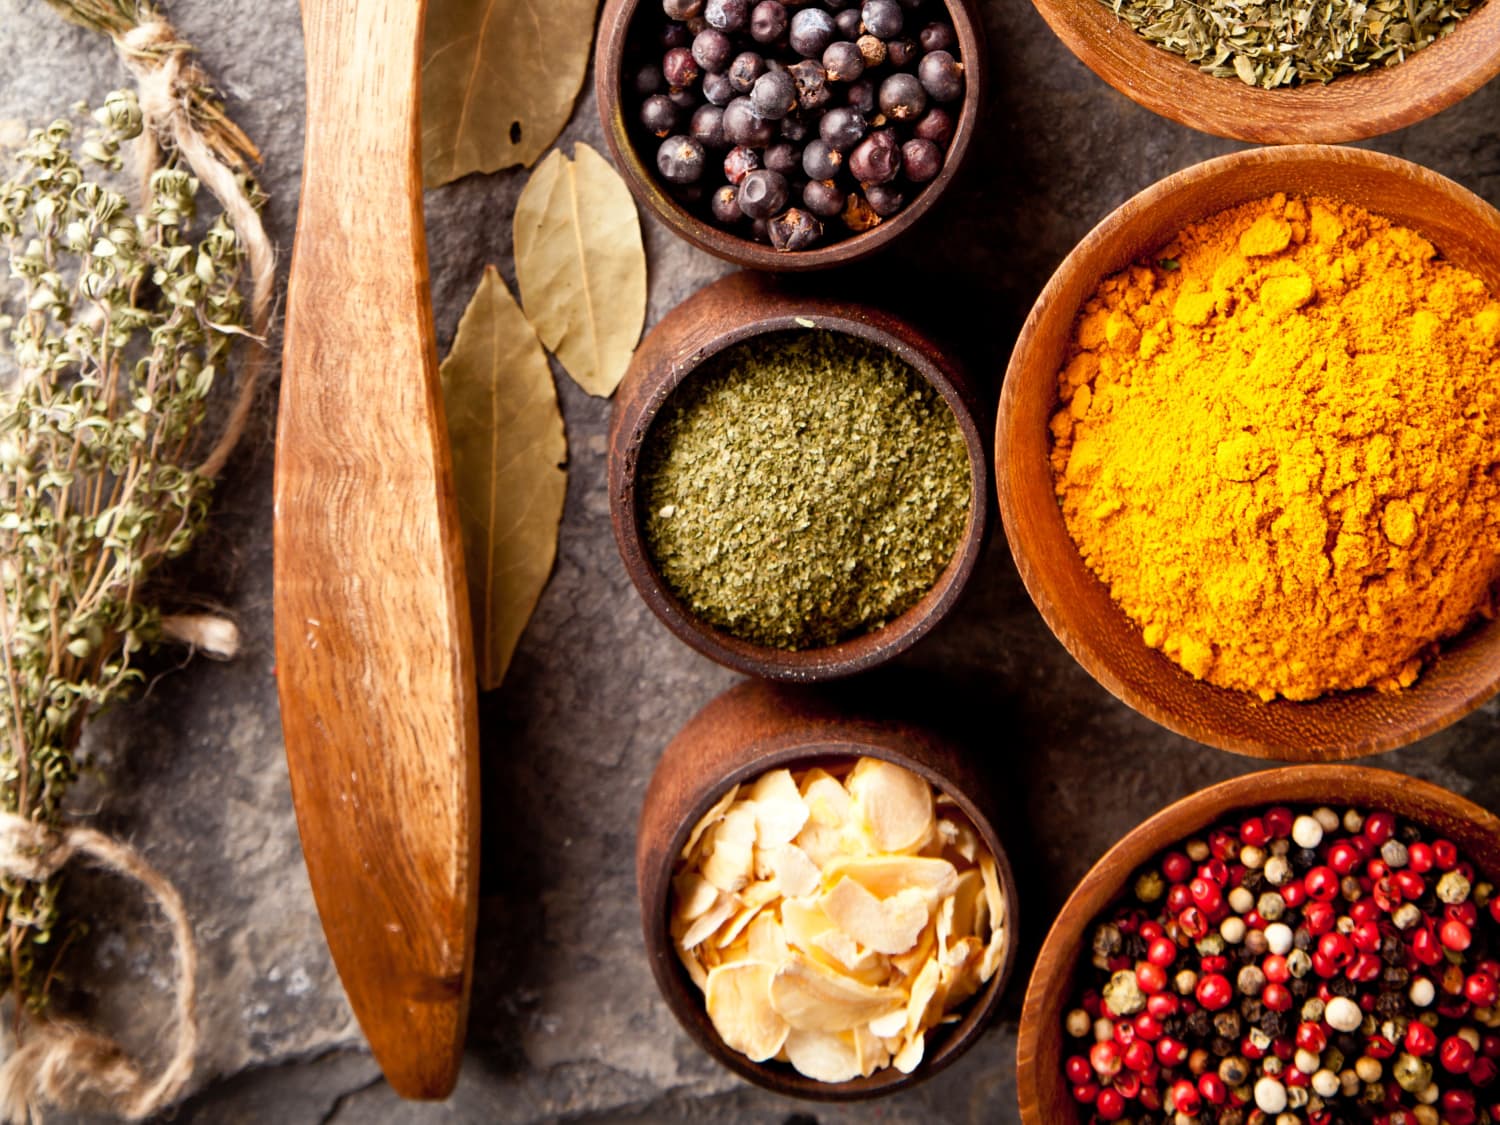 Quick Guide To Every Herb And Spice In The Cupboard Kitchn - 